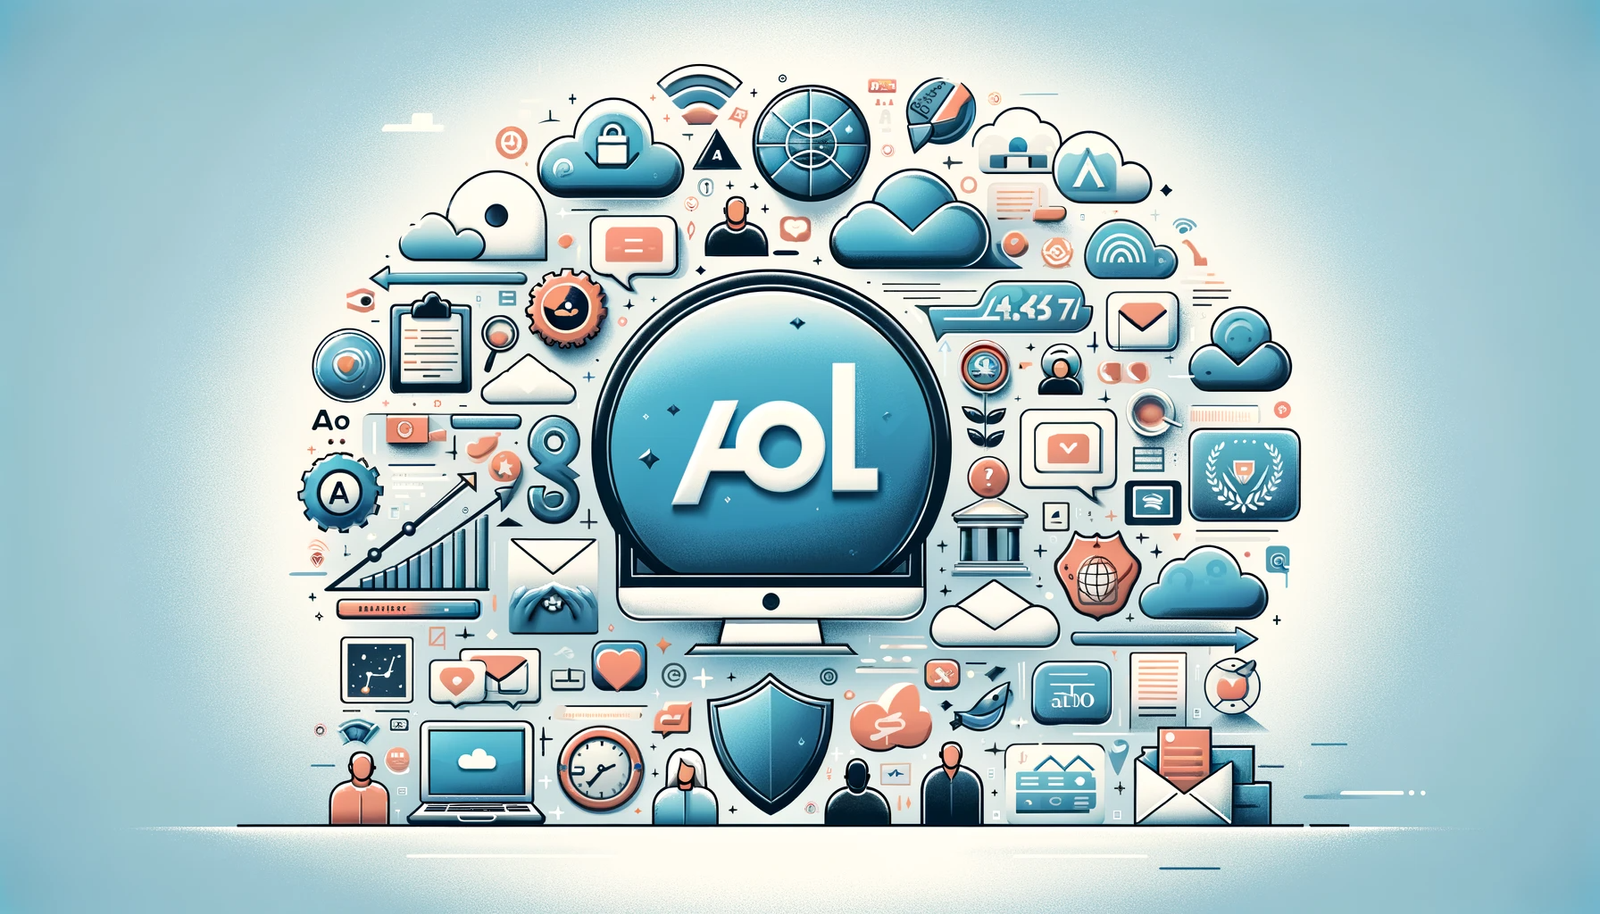 What are the Benefits of Having an AOL Account